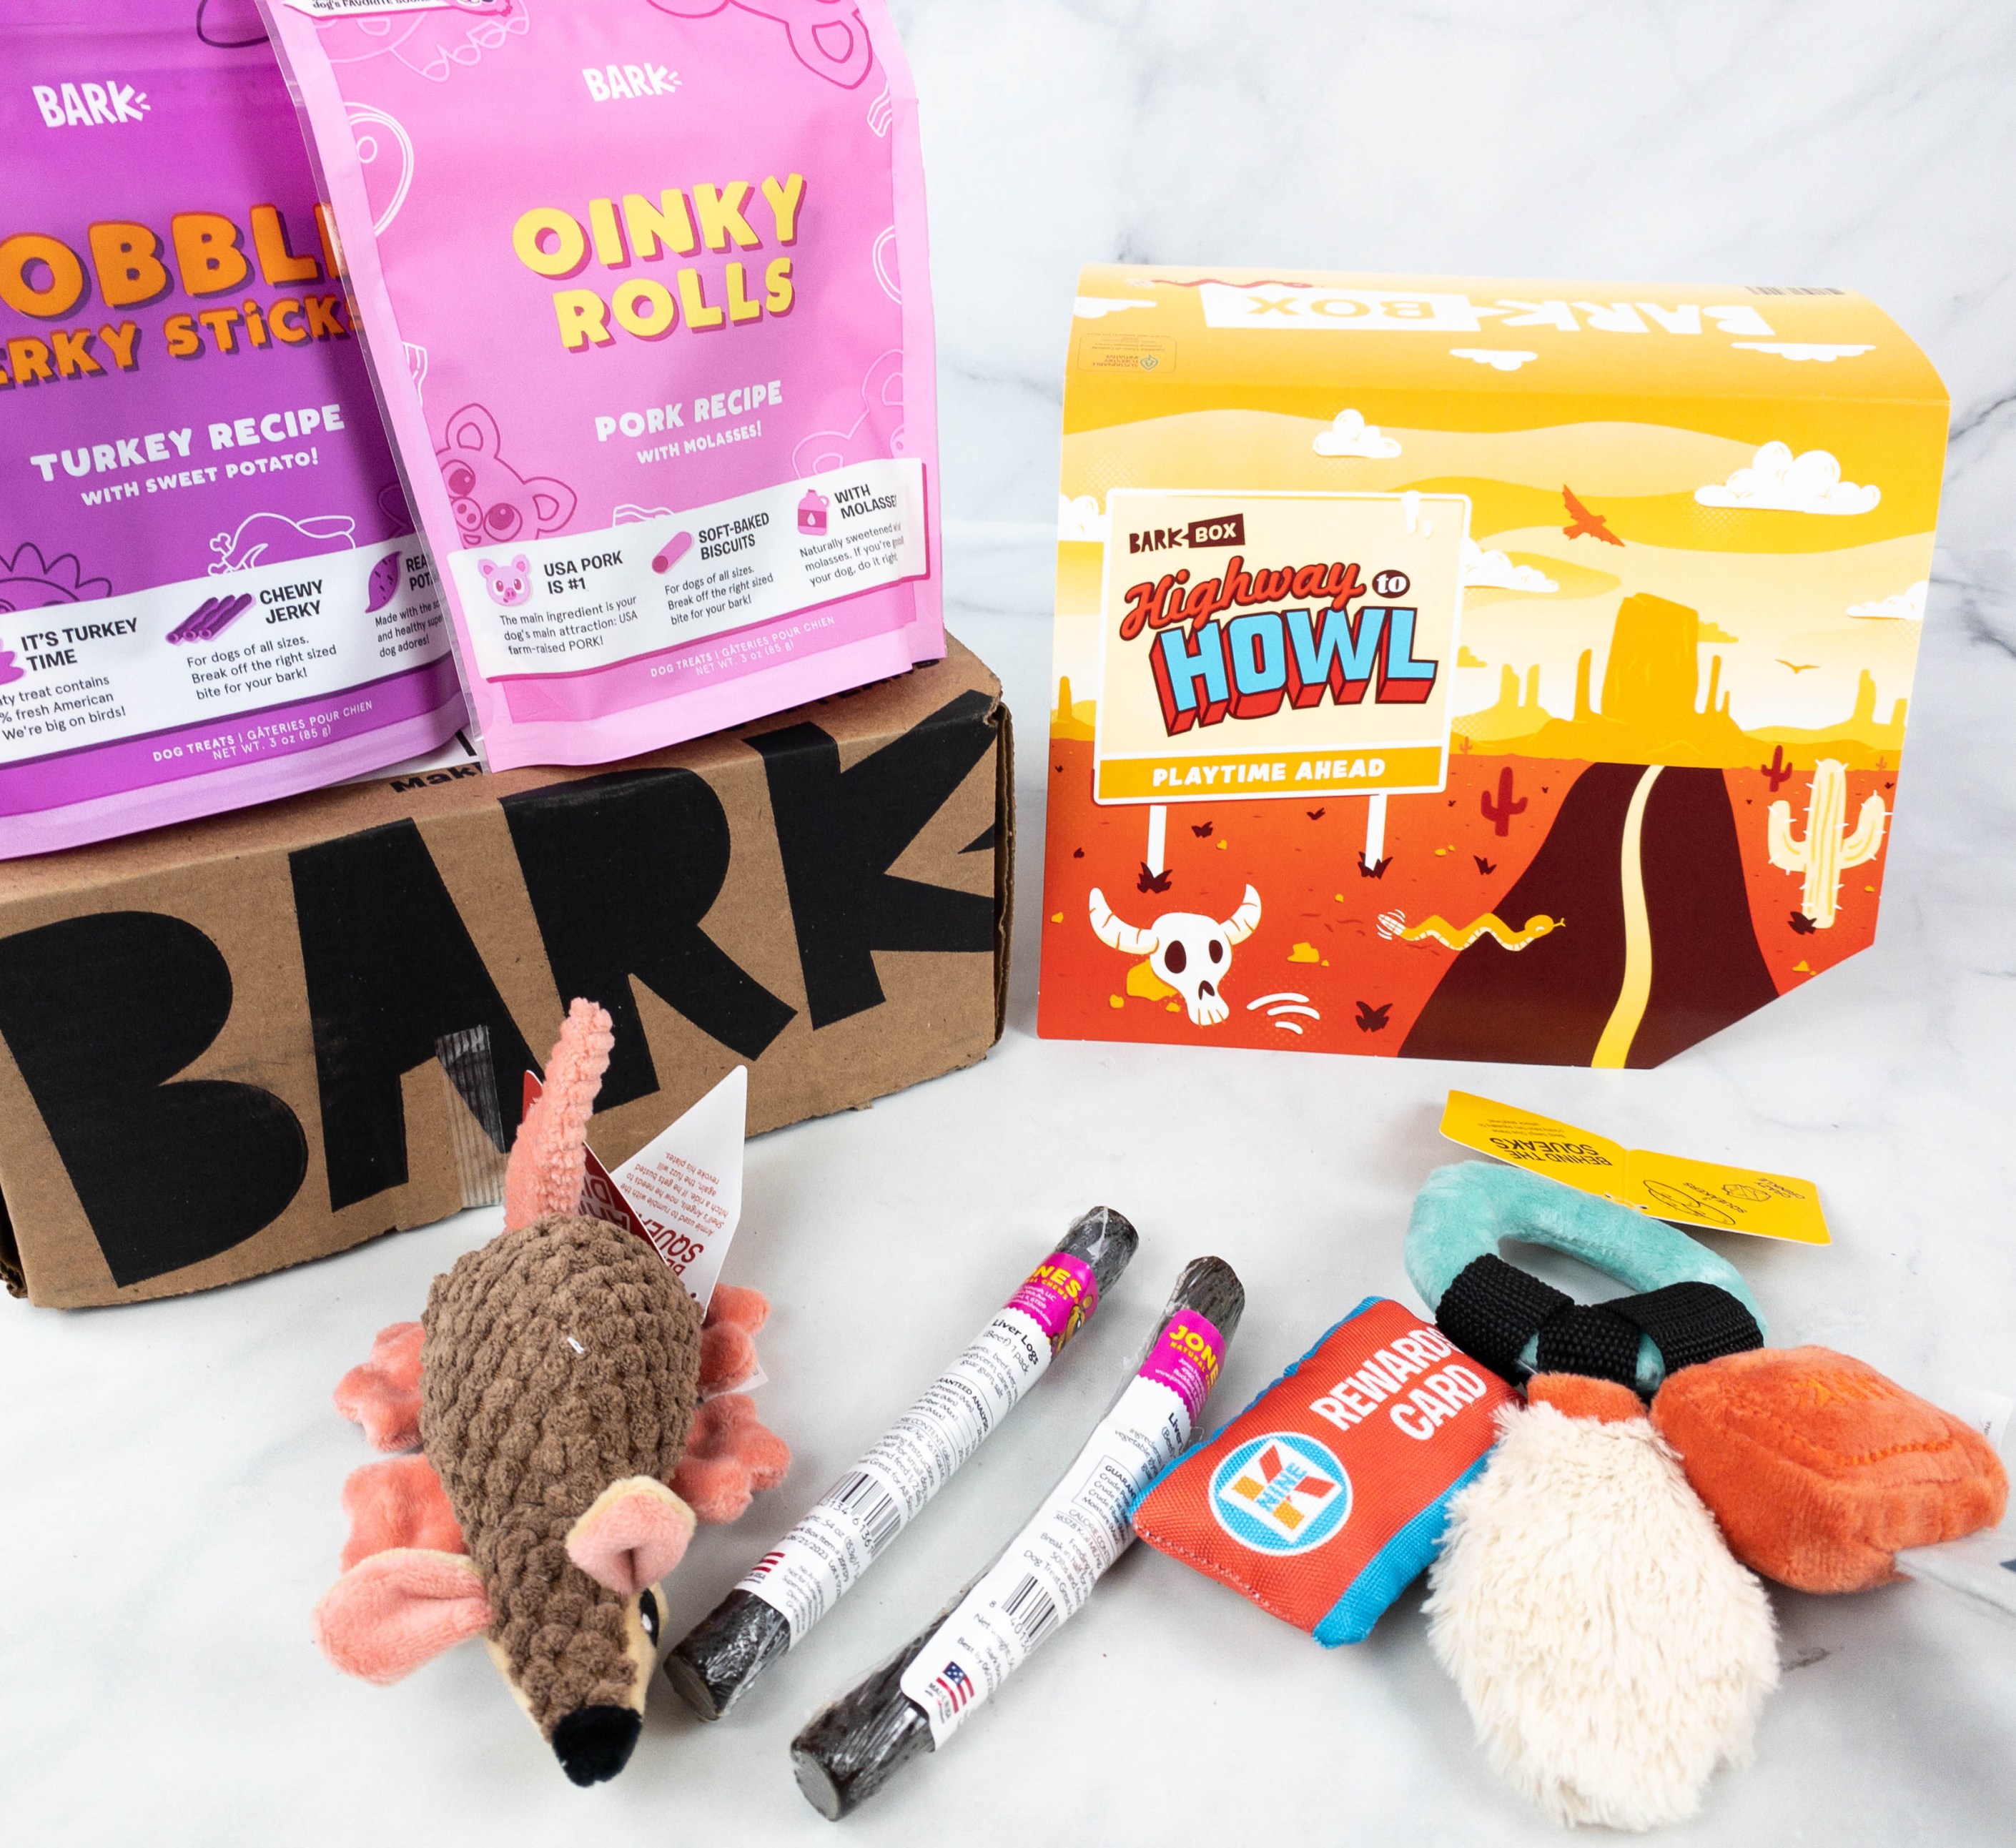 BarkBox Reviews Get All The Details At Hello Subscription!